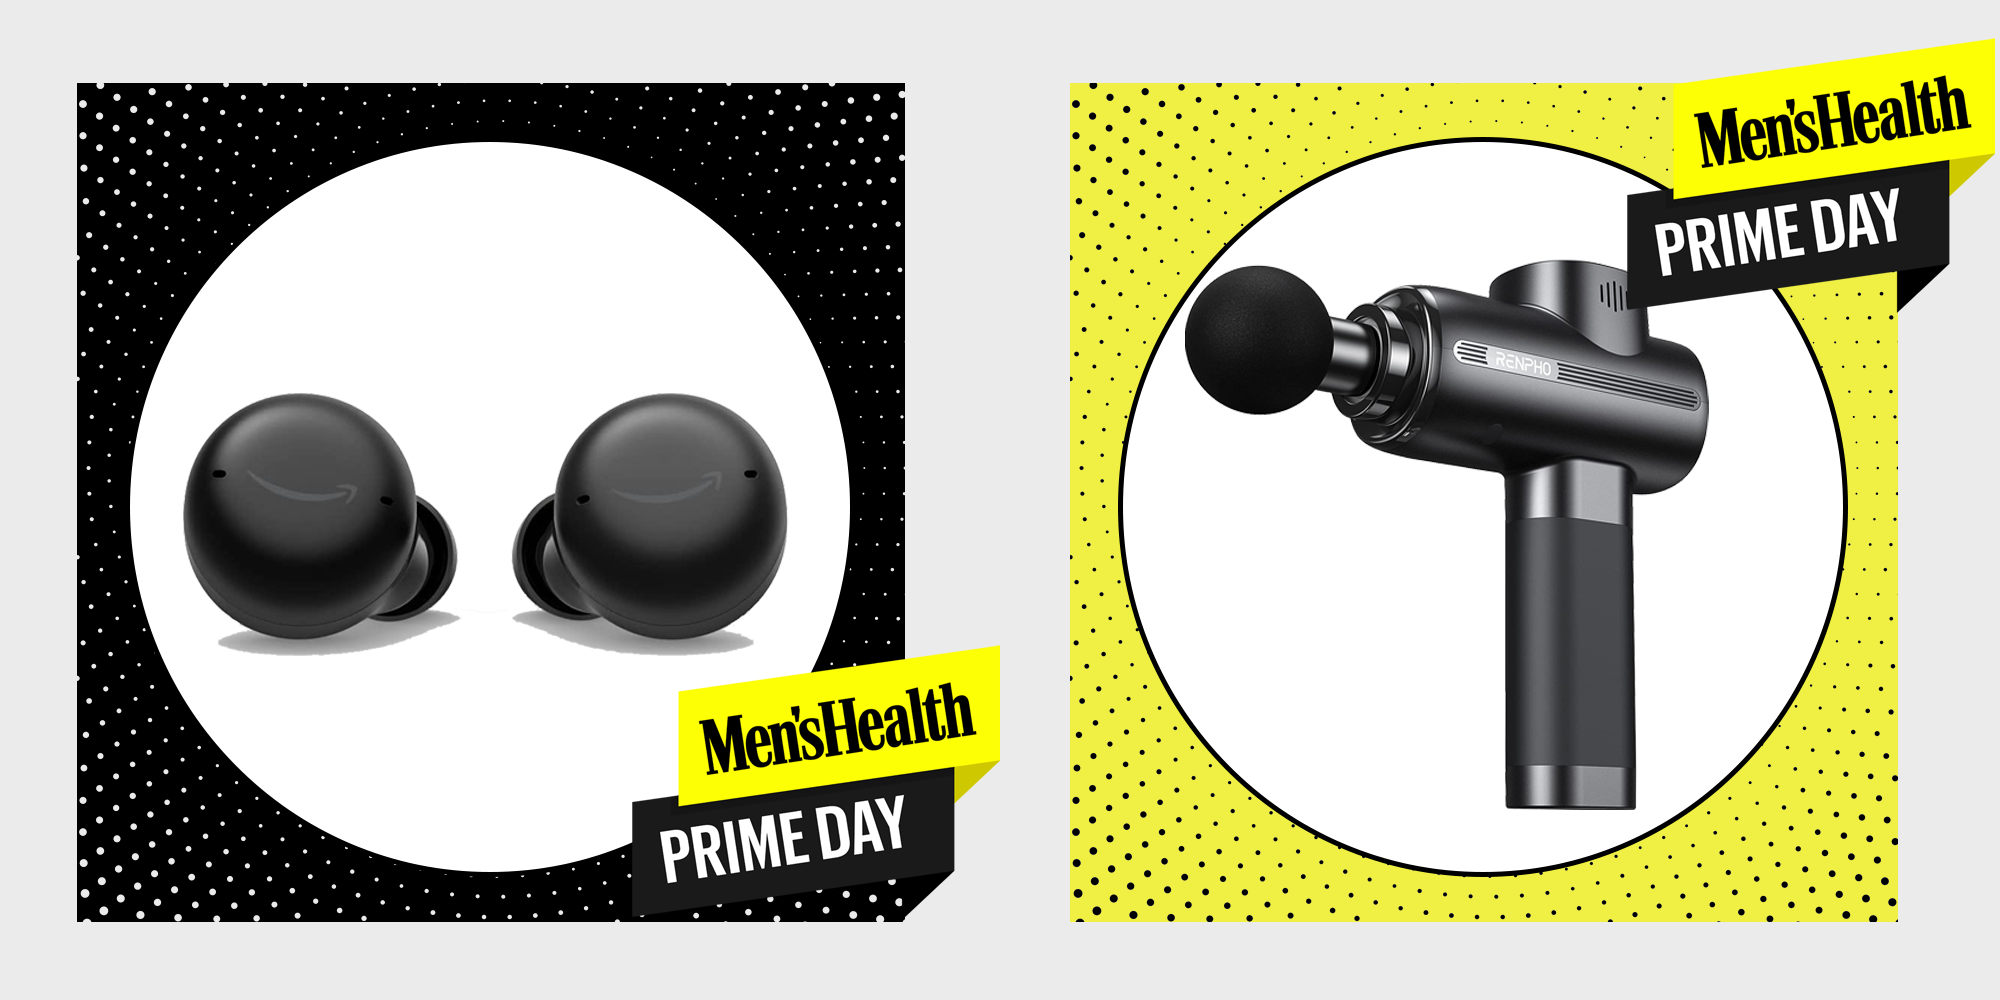 Prime Big Deal Days 2023: The Best Fitness Deals to Shop